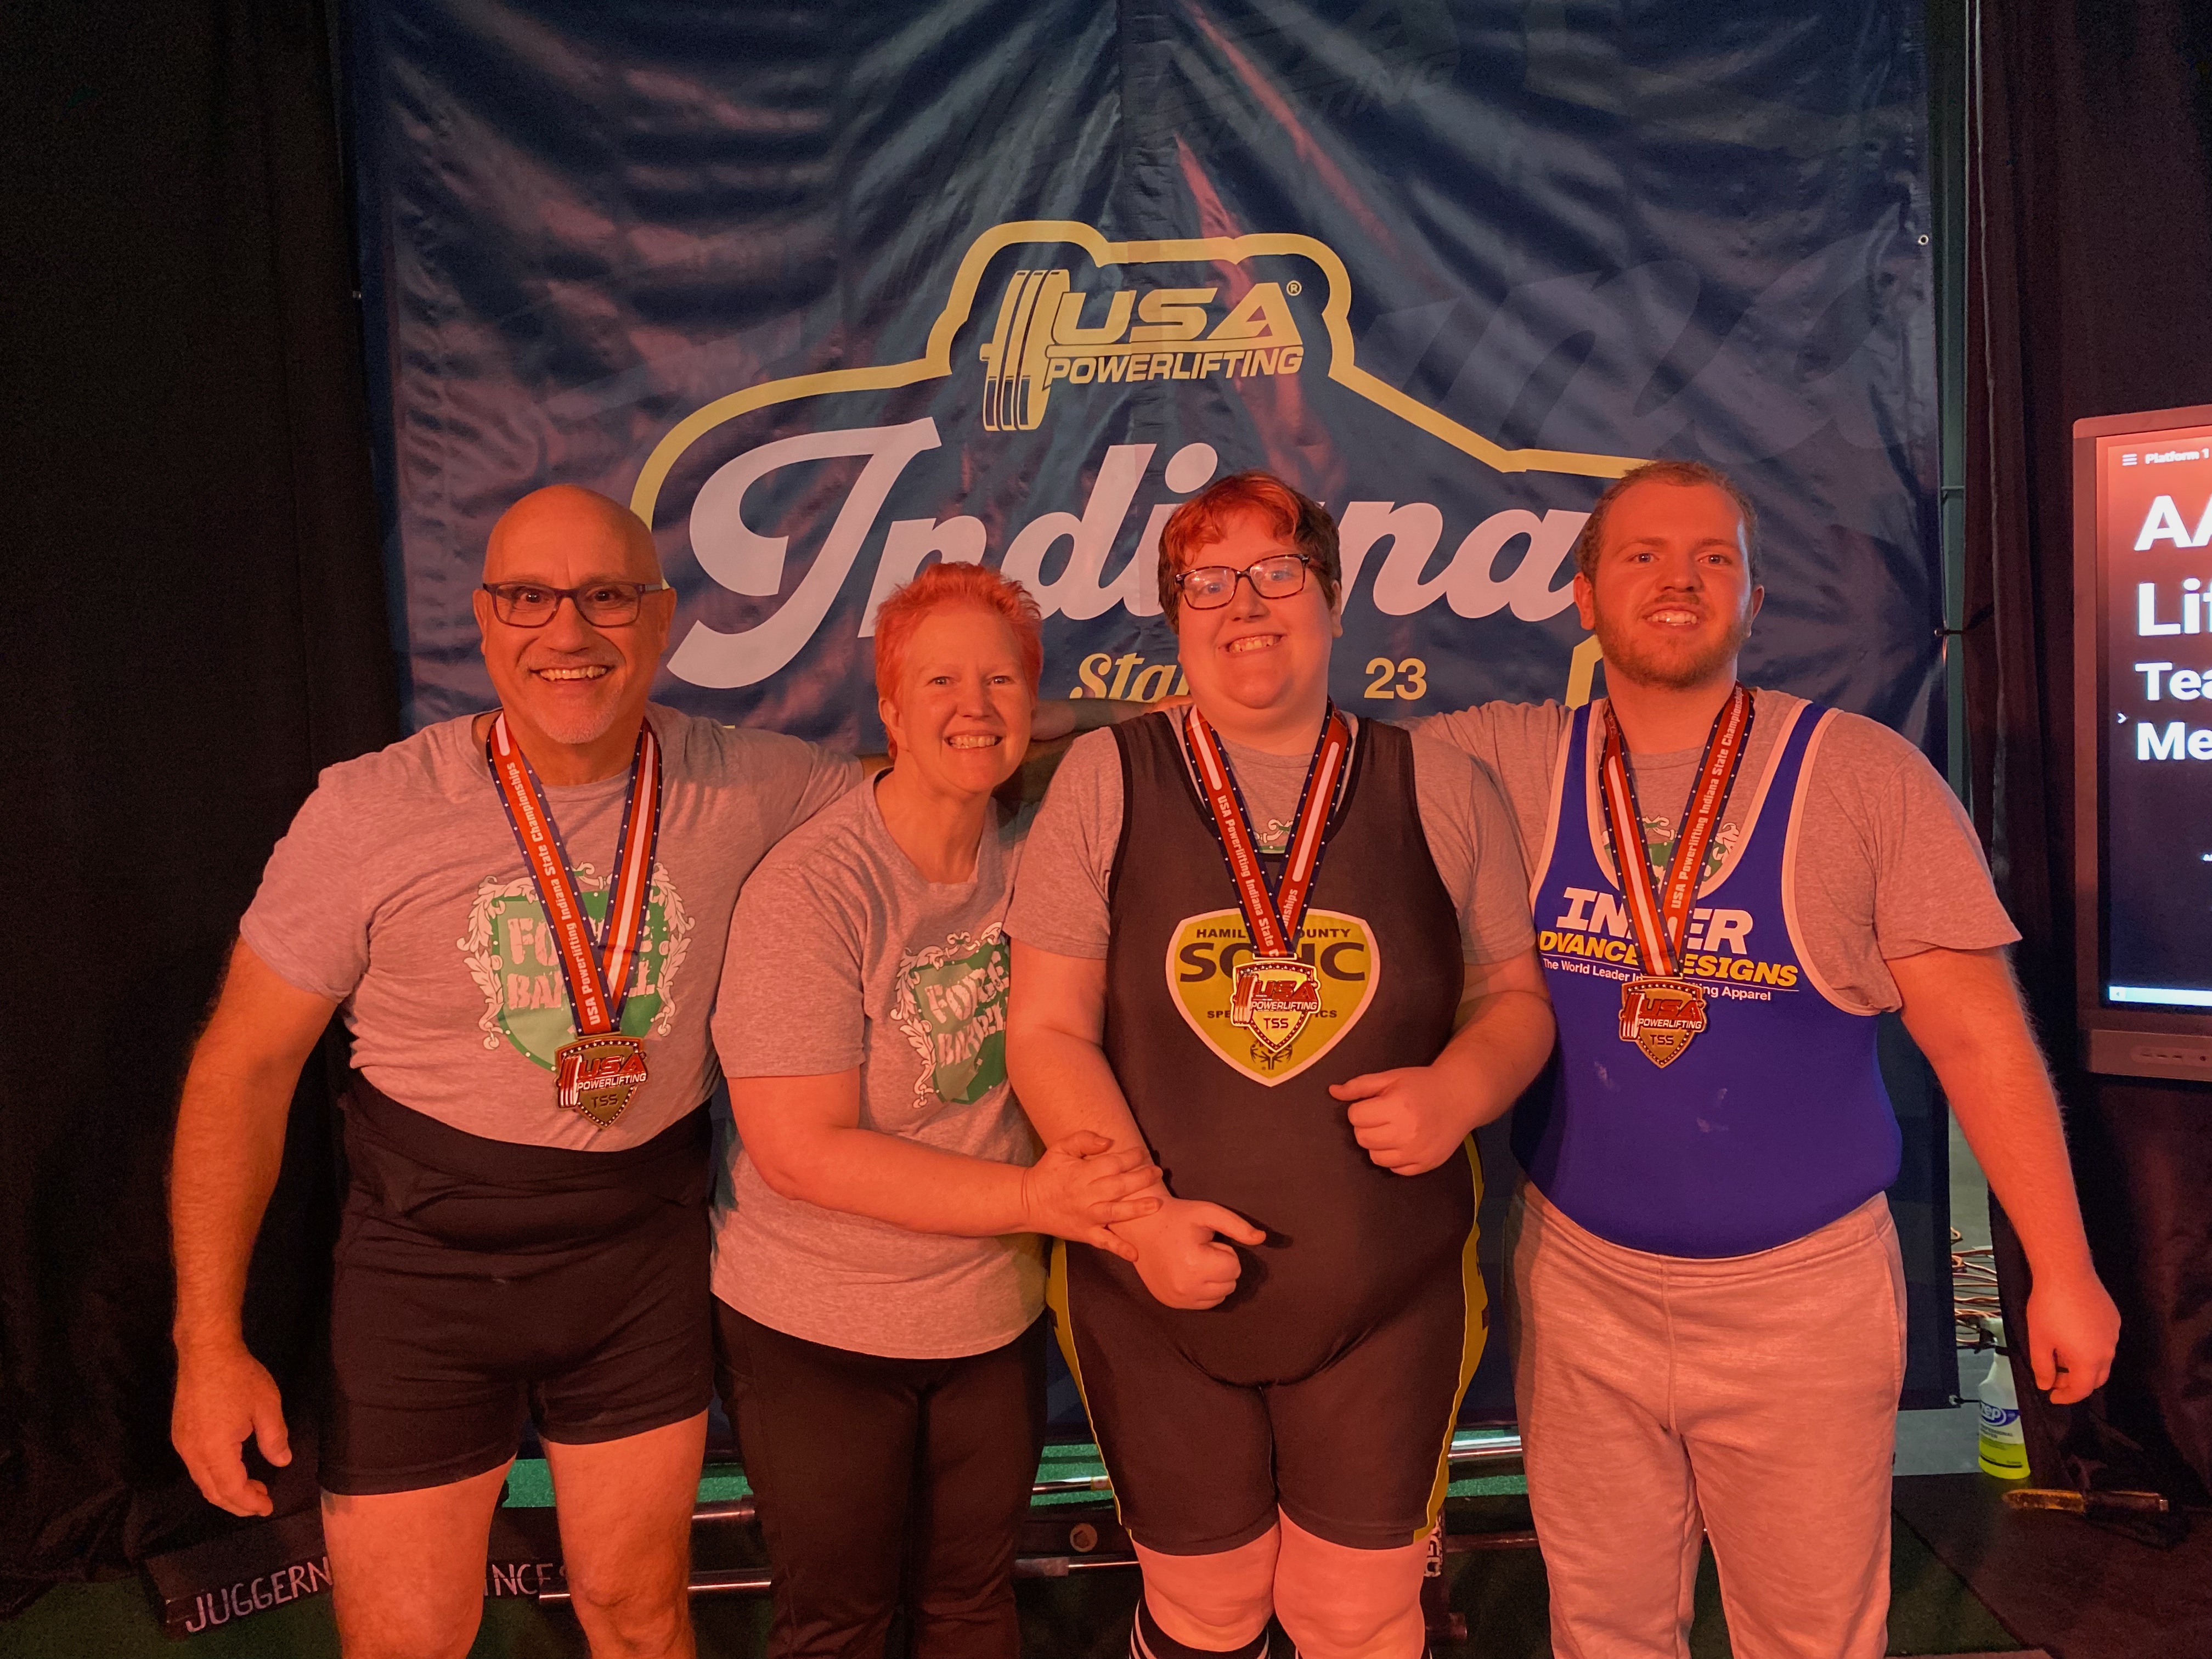 Smith Family at the USA Powerlifting State Championships